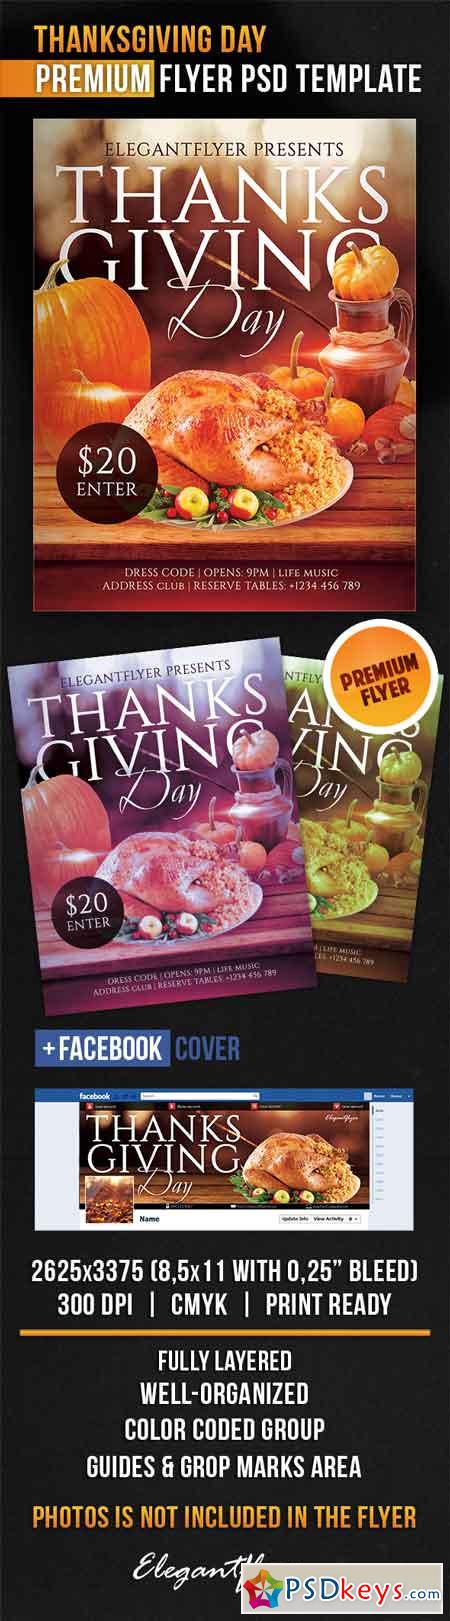 Thanksgiving Day – Flyer PSD Template + Facebook Cover